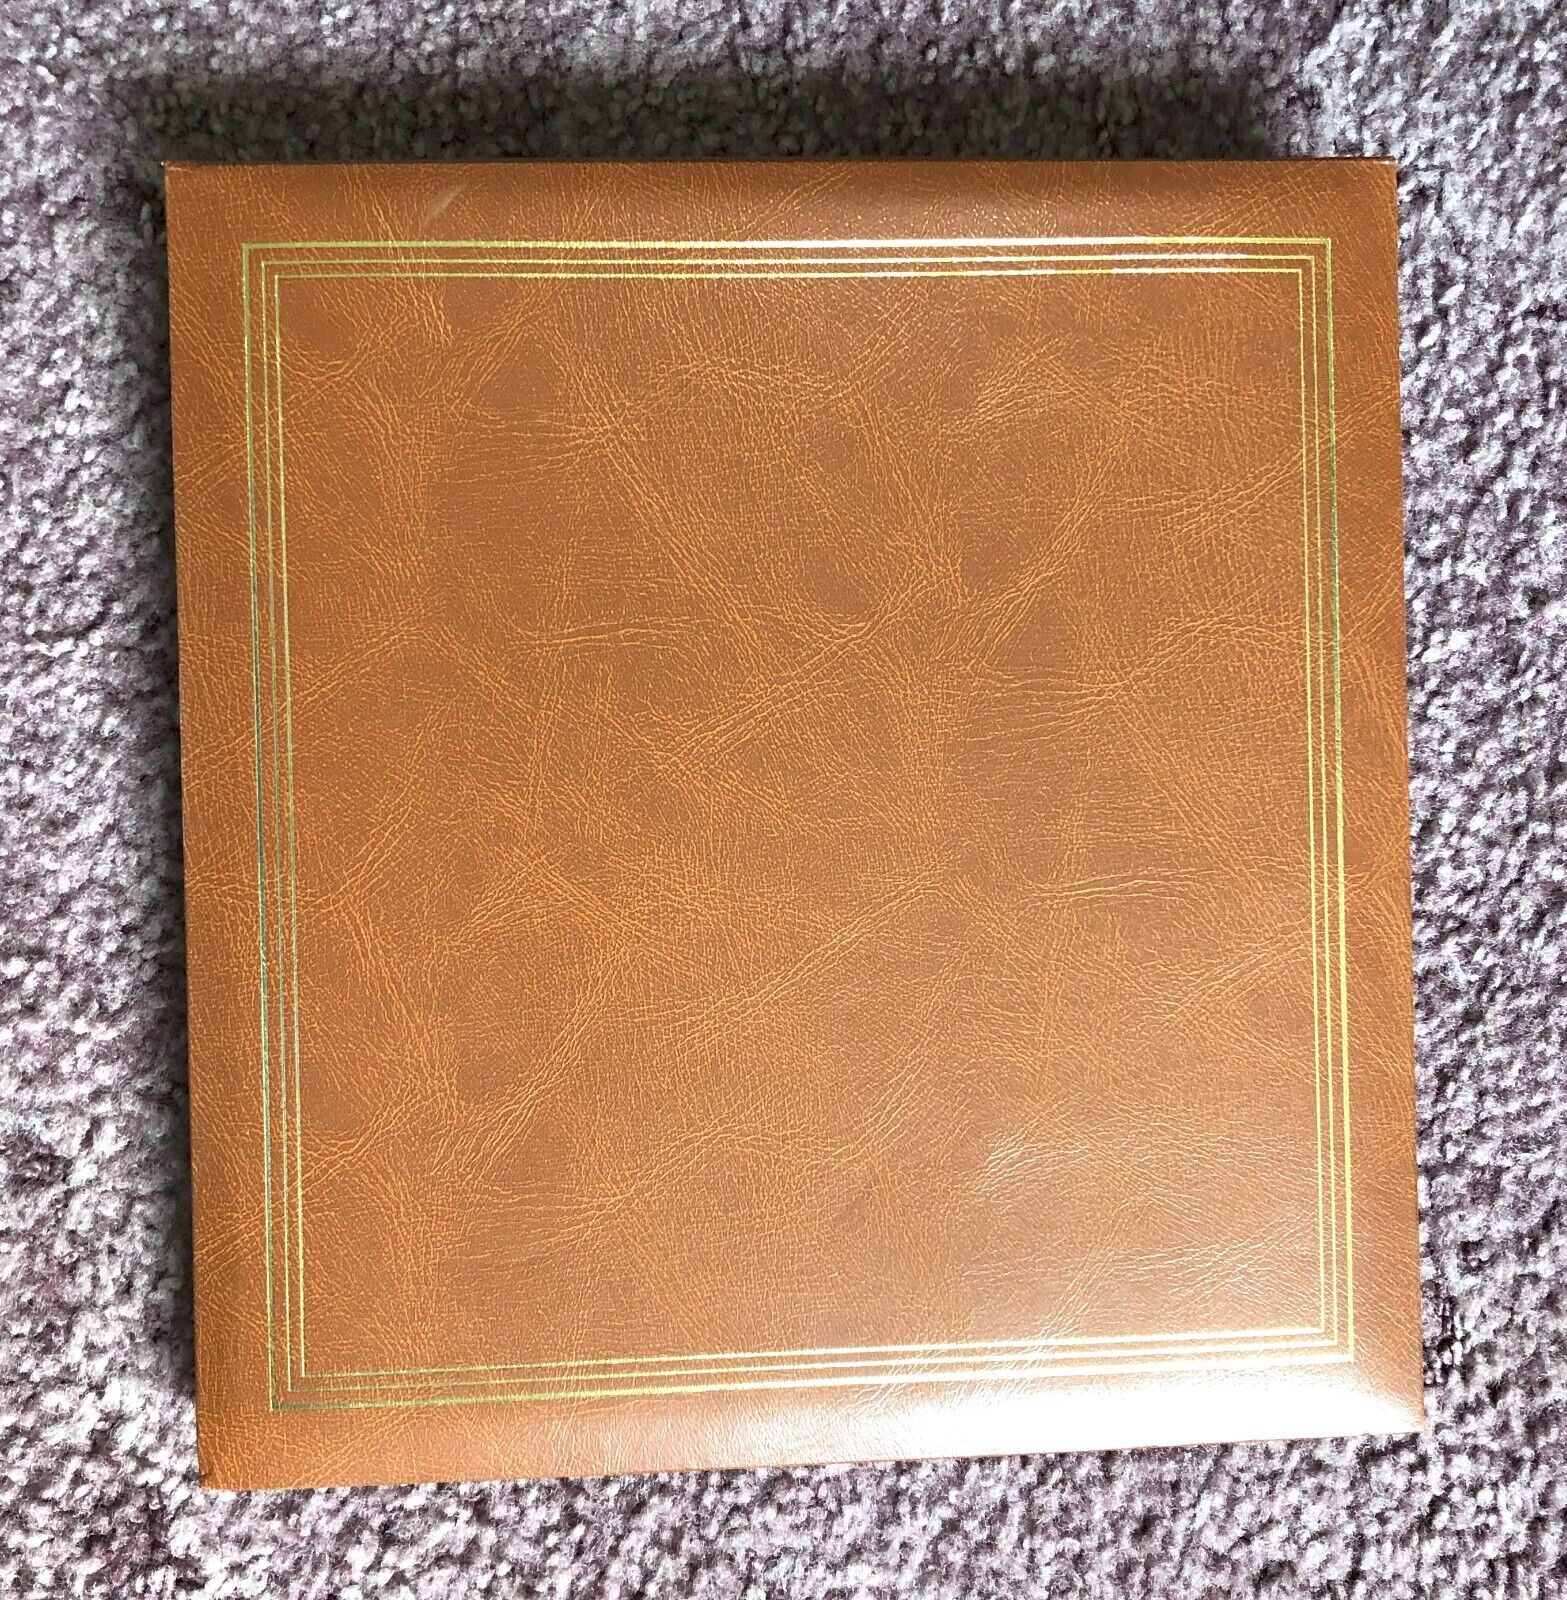 Vintage Leather Look Photo Album w/ 68 Pages for Photos, Each Page Holds 6 Photo